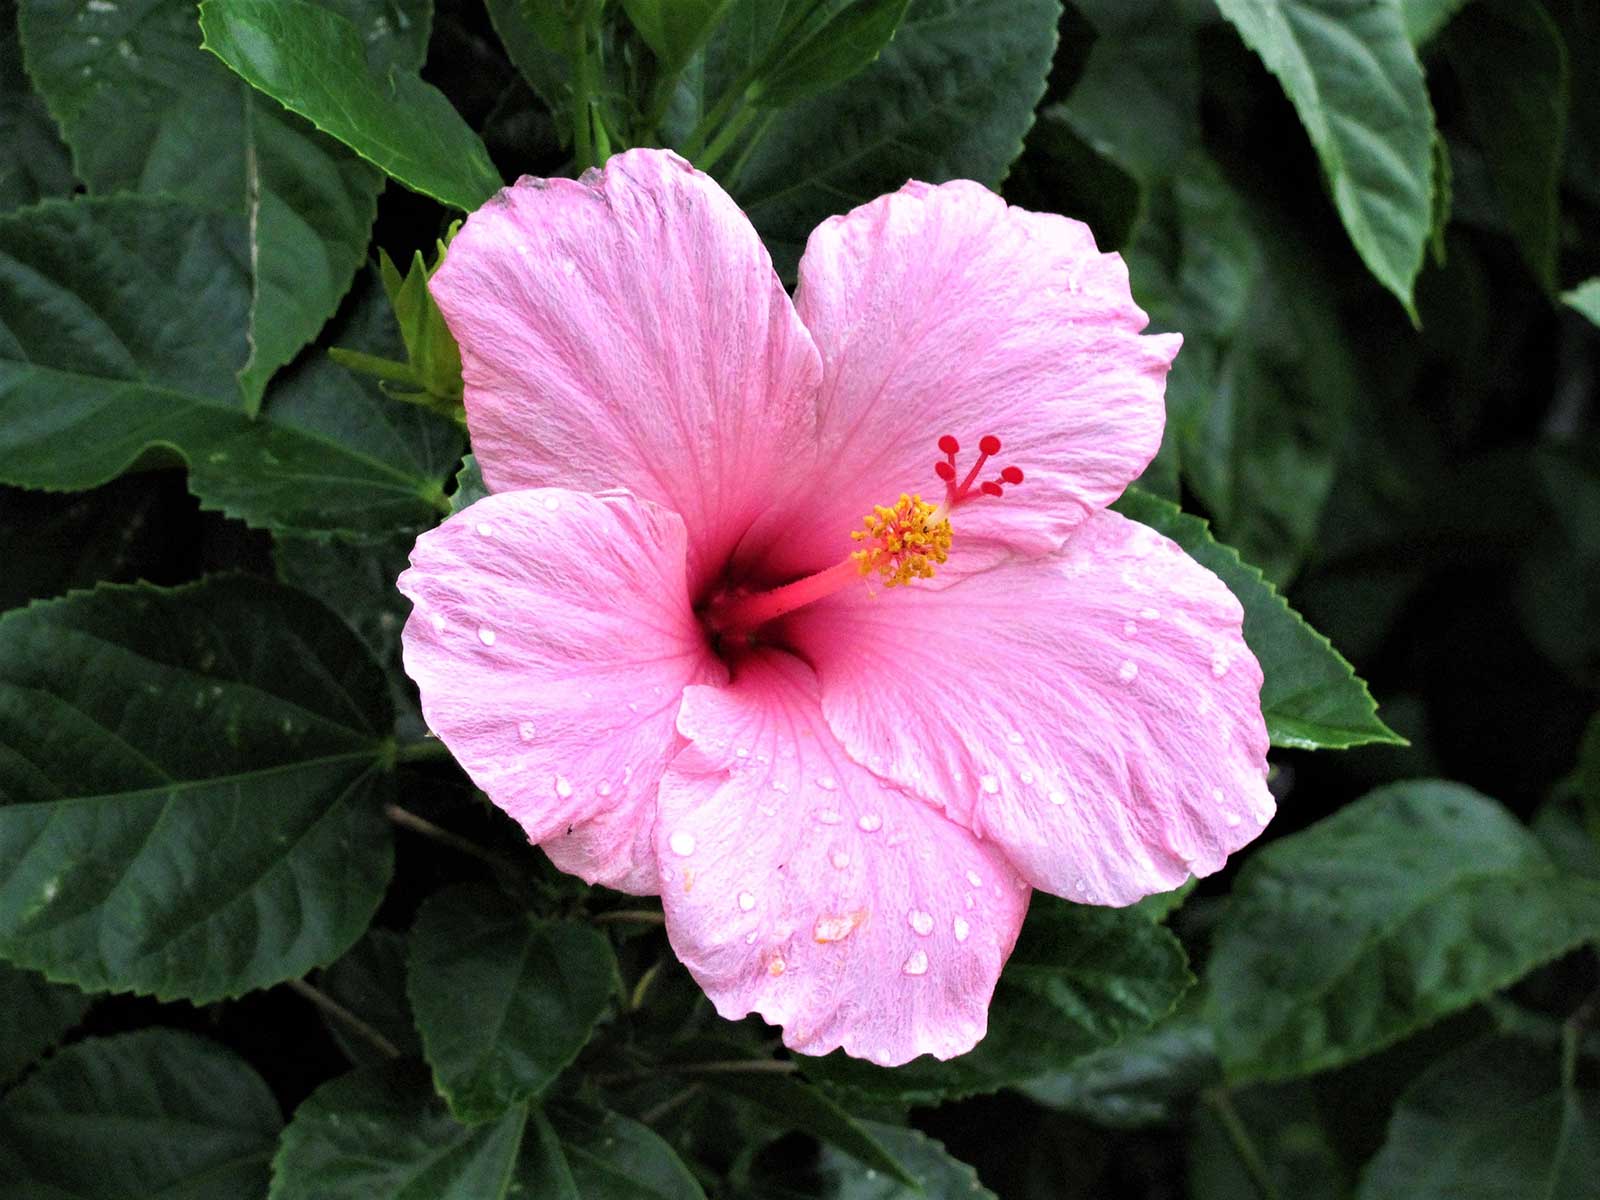 hibiscus is a favorite of hummingbirds in part due to its fantastic color. Vibrant colors draw hummingbirds, so Hibiscus is a good choice for a hummingbird garden.